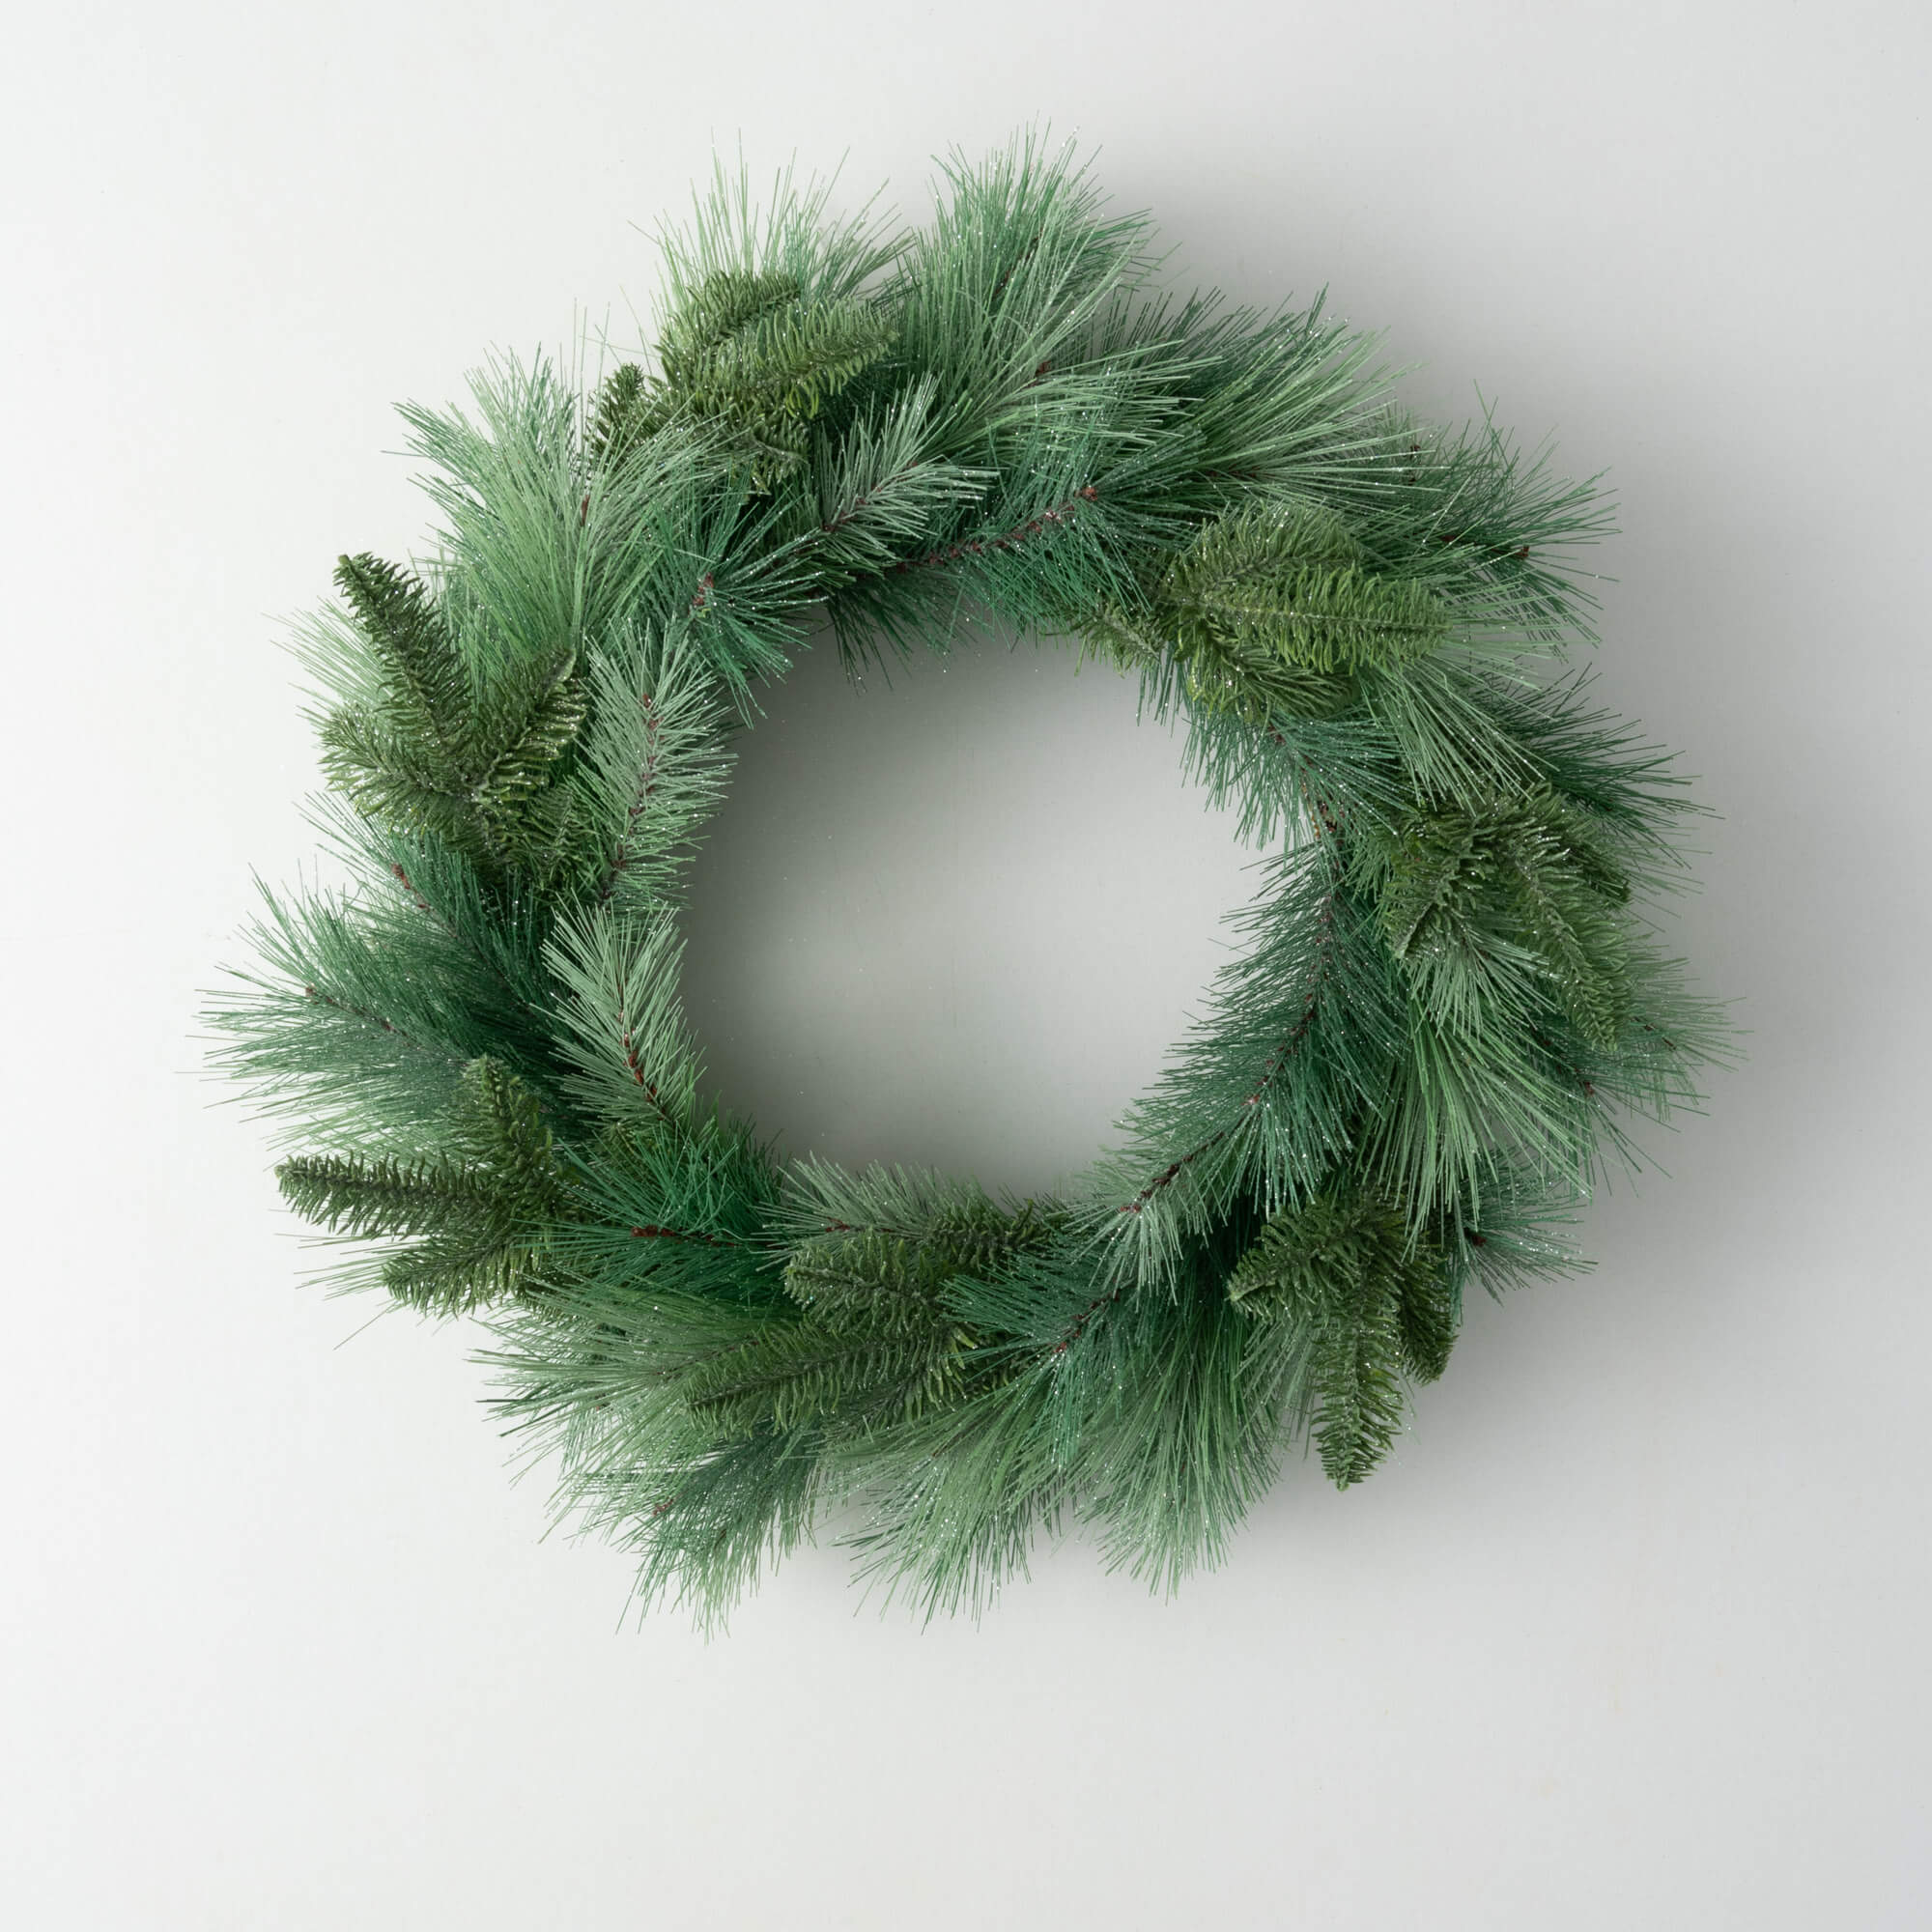 LIGHT FROSTED PINE WREATH